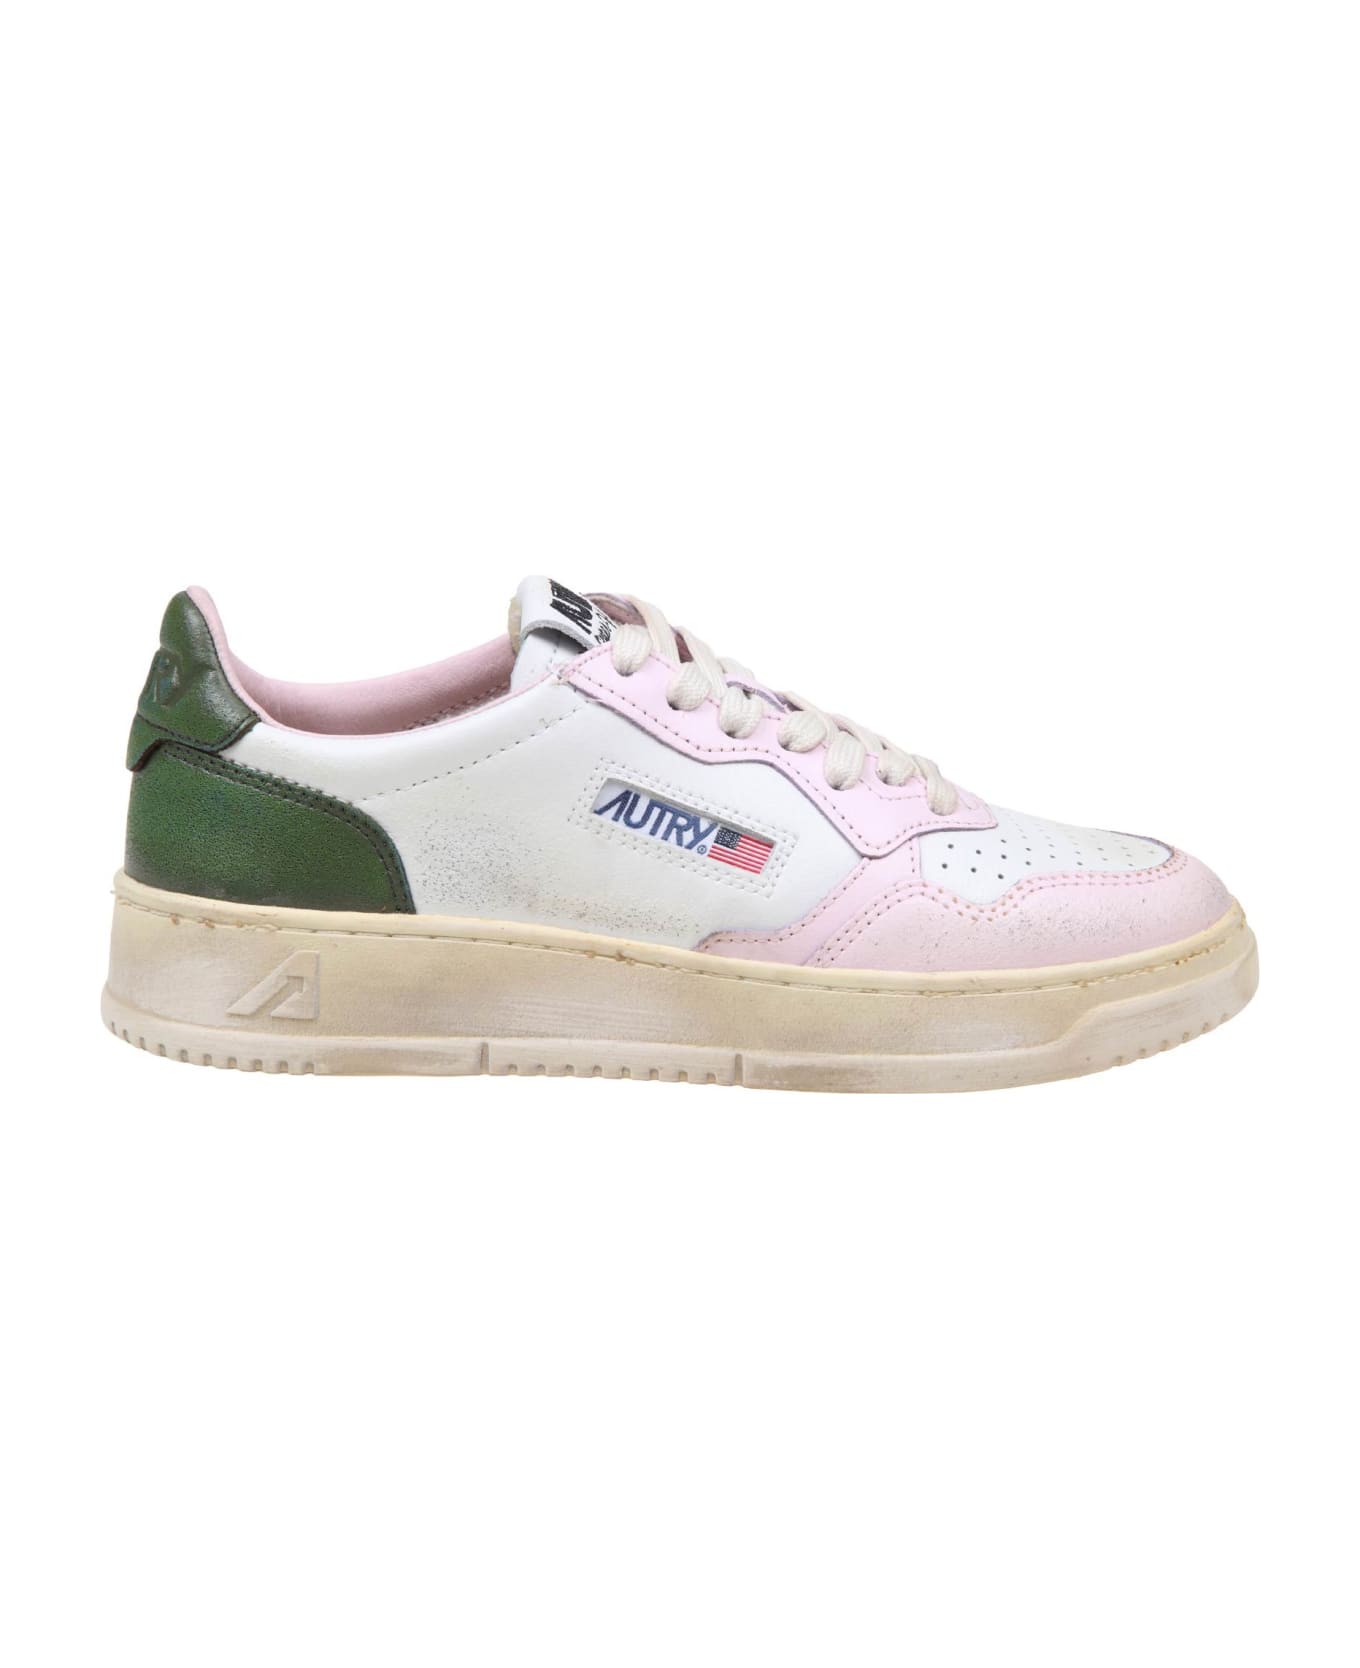 Autry Vintage Leather Sneakers - White/Lilac スニーカー